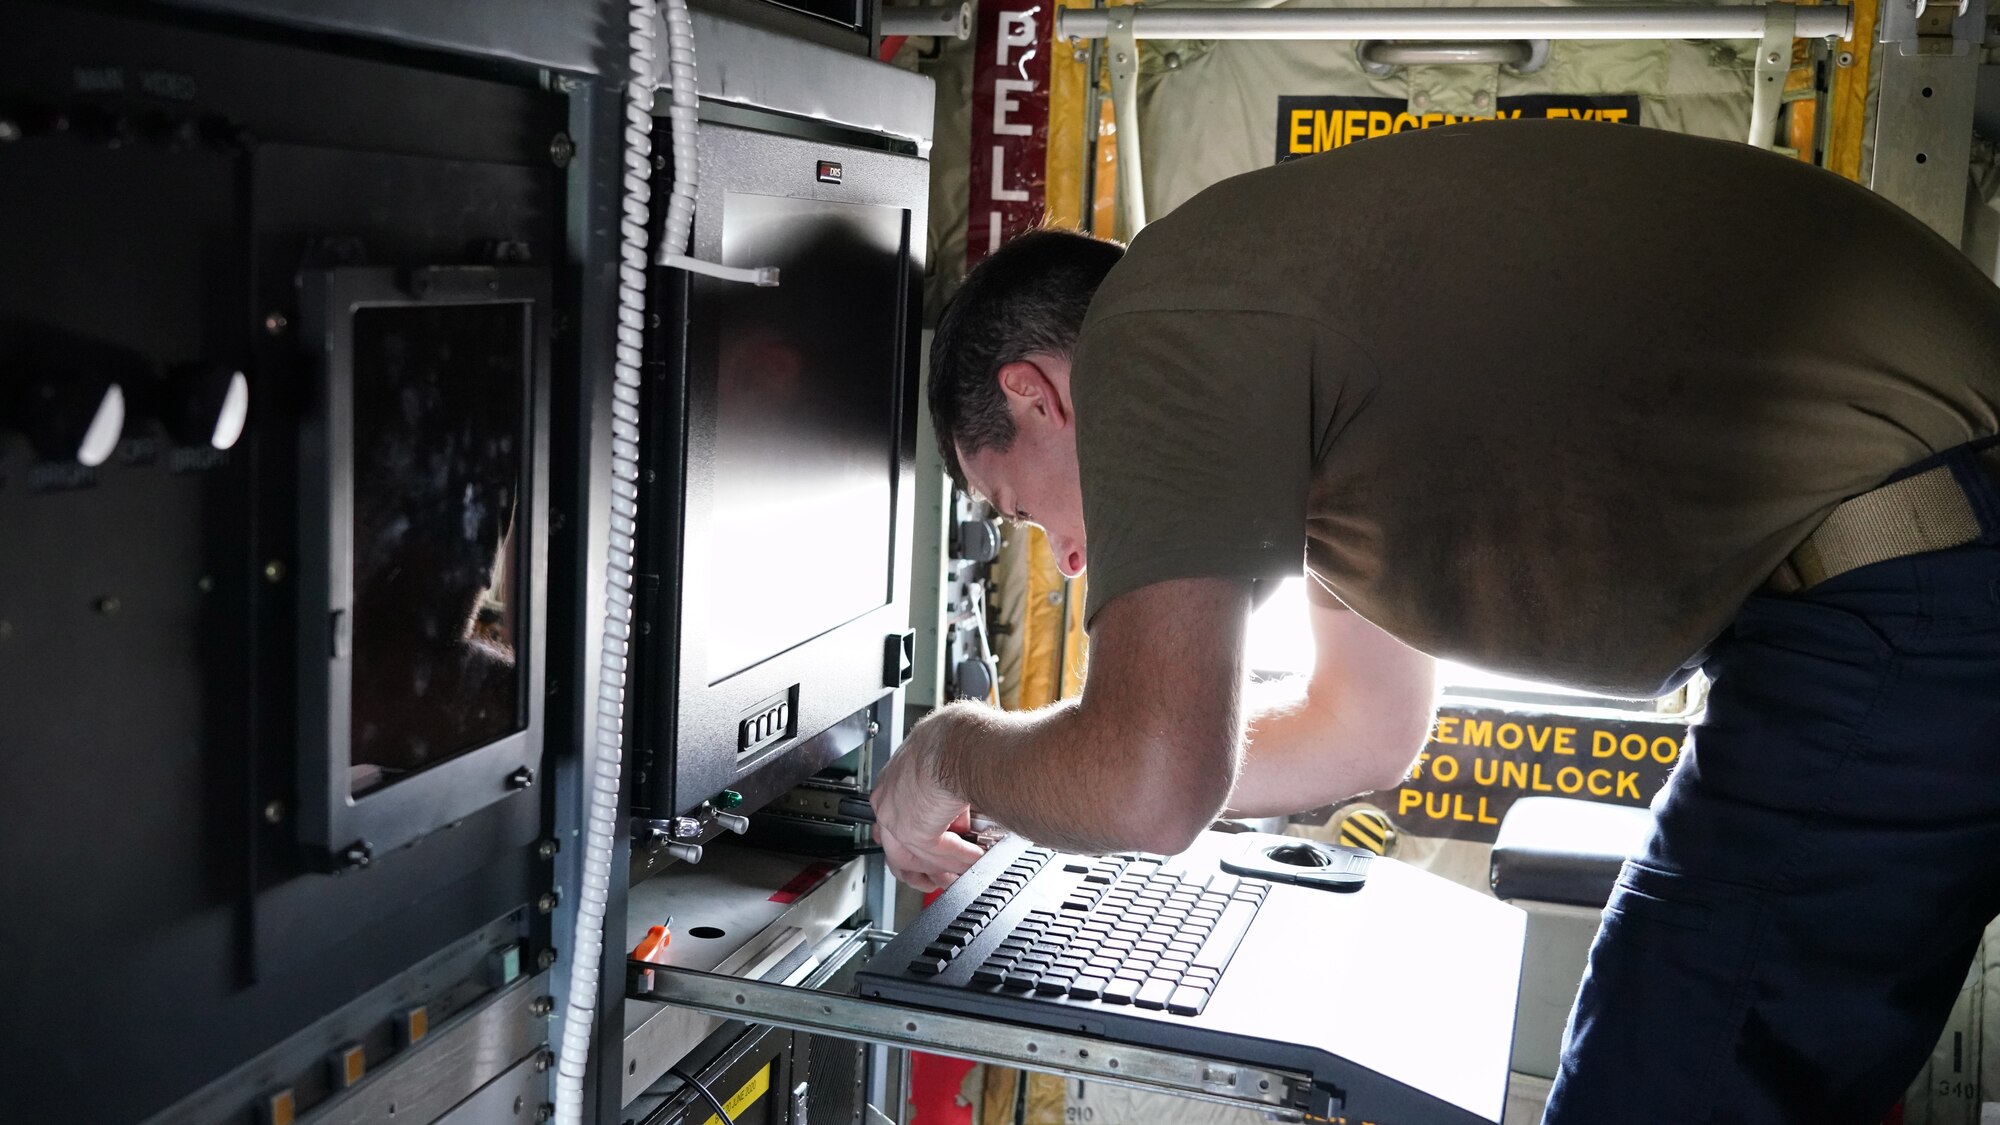 Shows a male Airman reattaching the keyboard for the new computer system on the military aircraft.